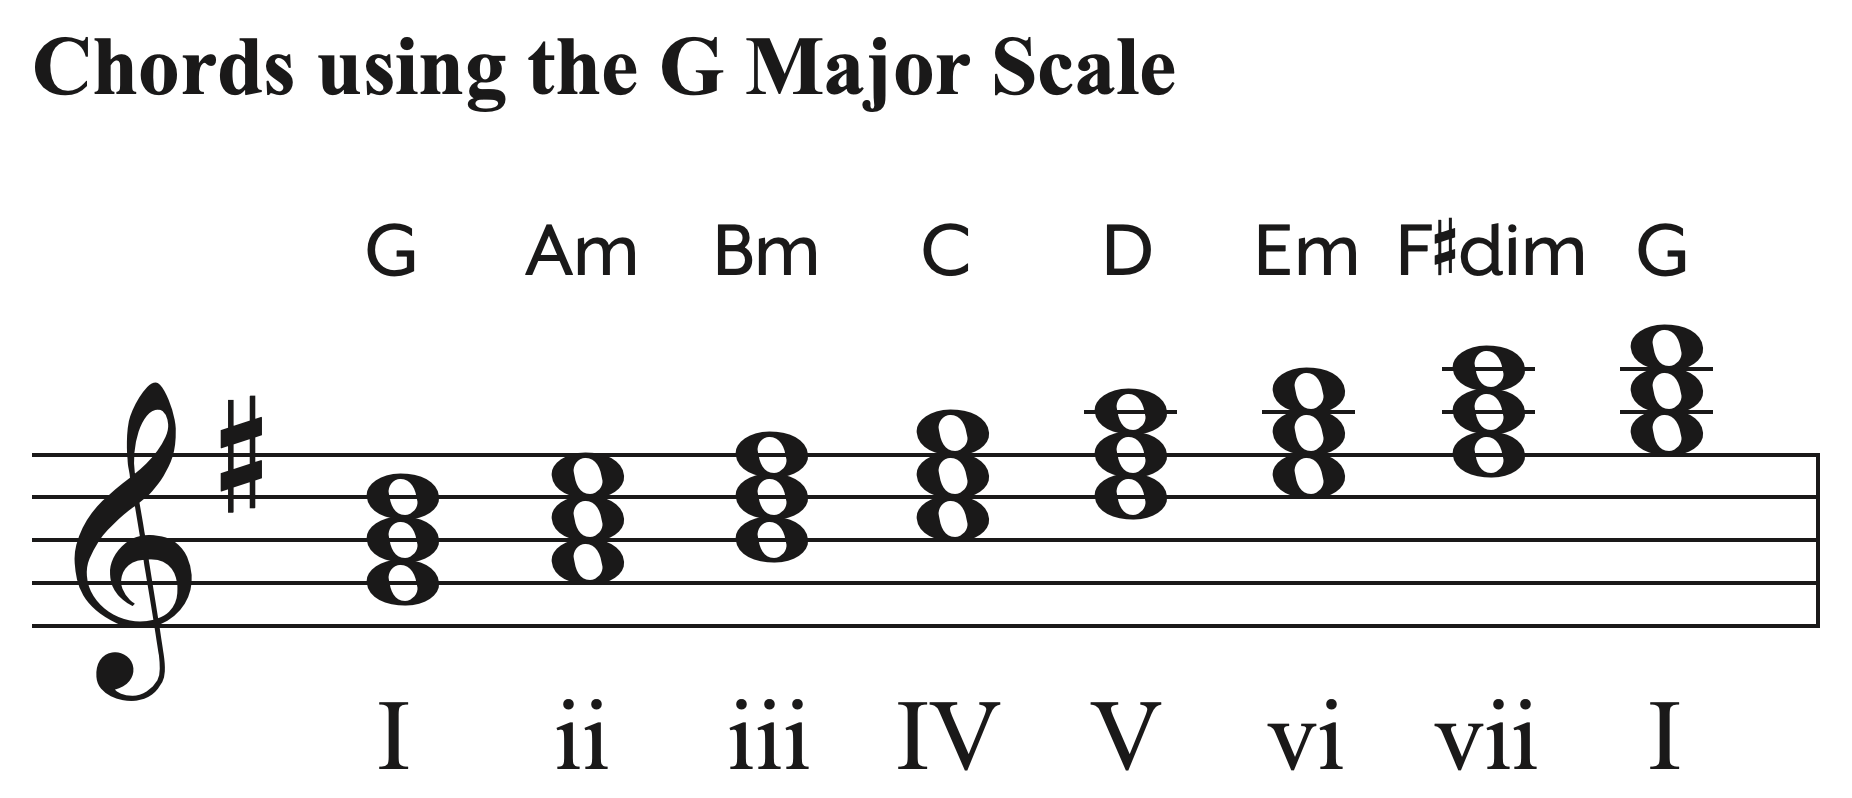 Chords using the G major scale